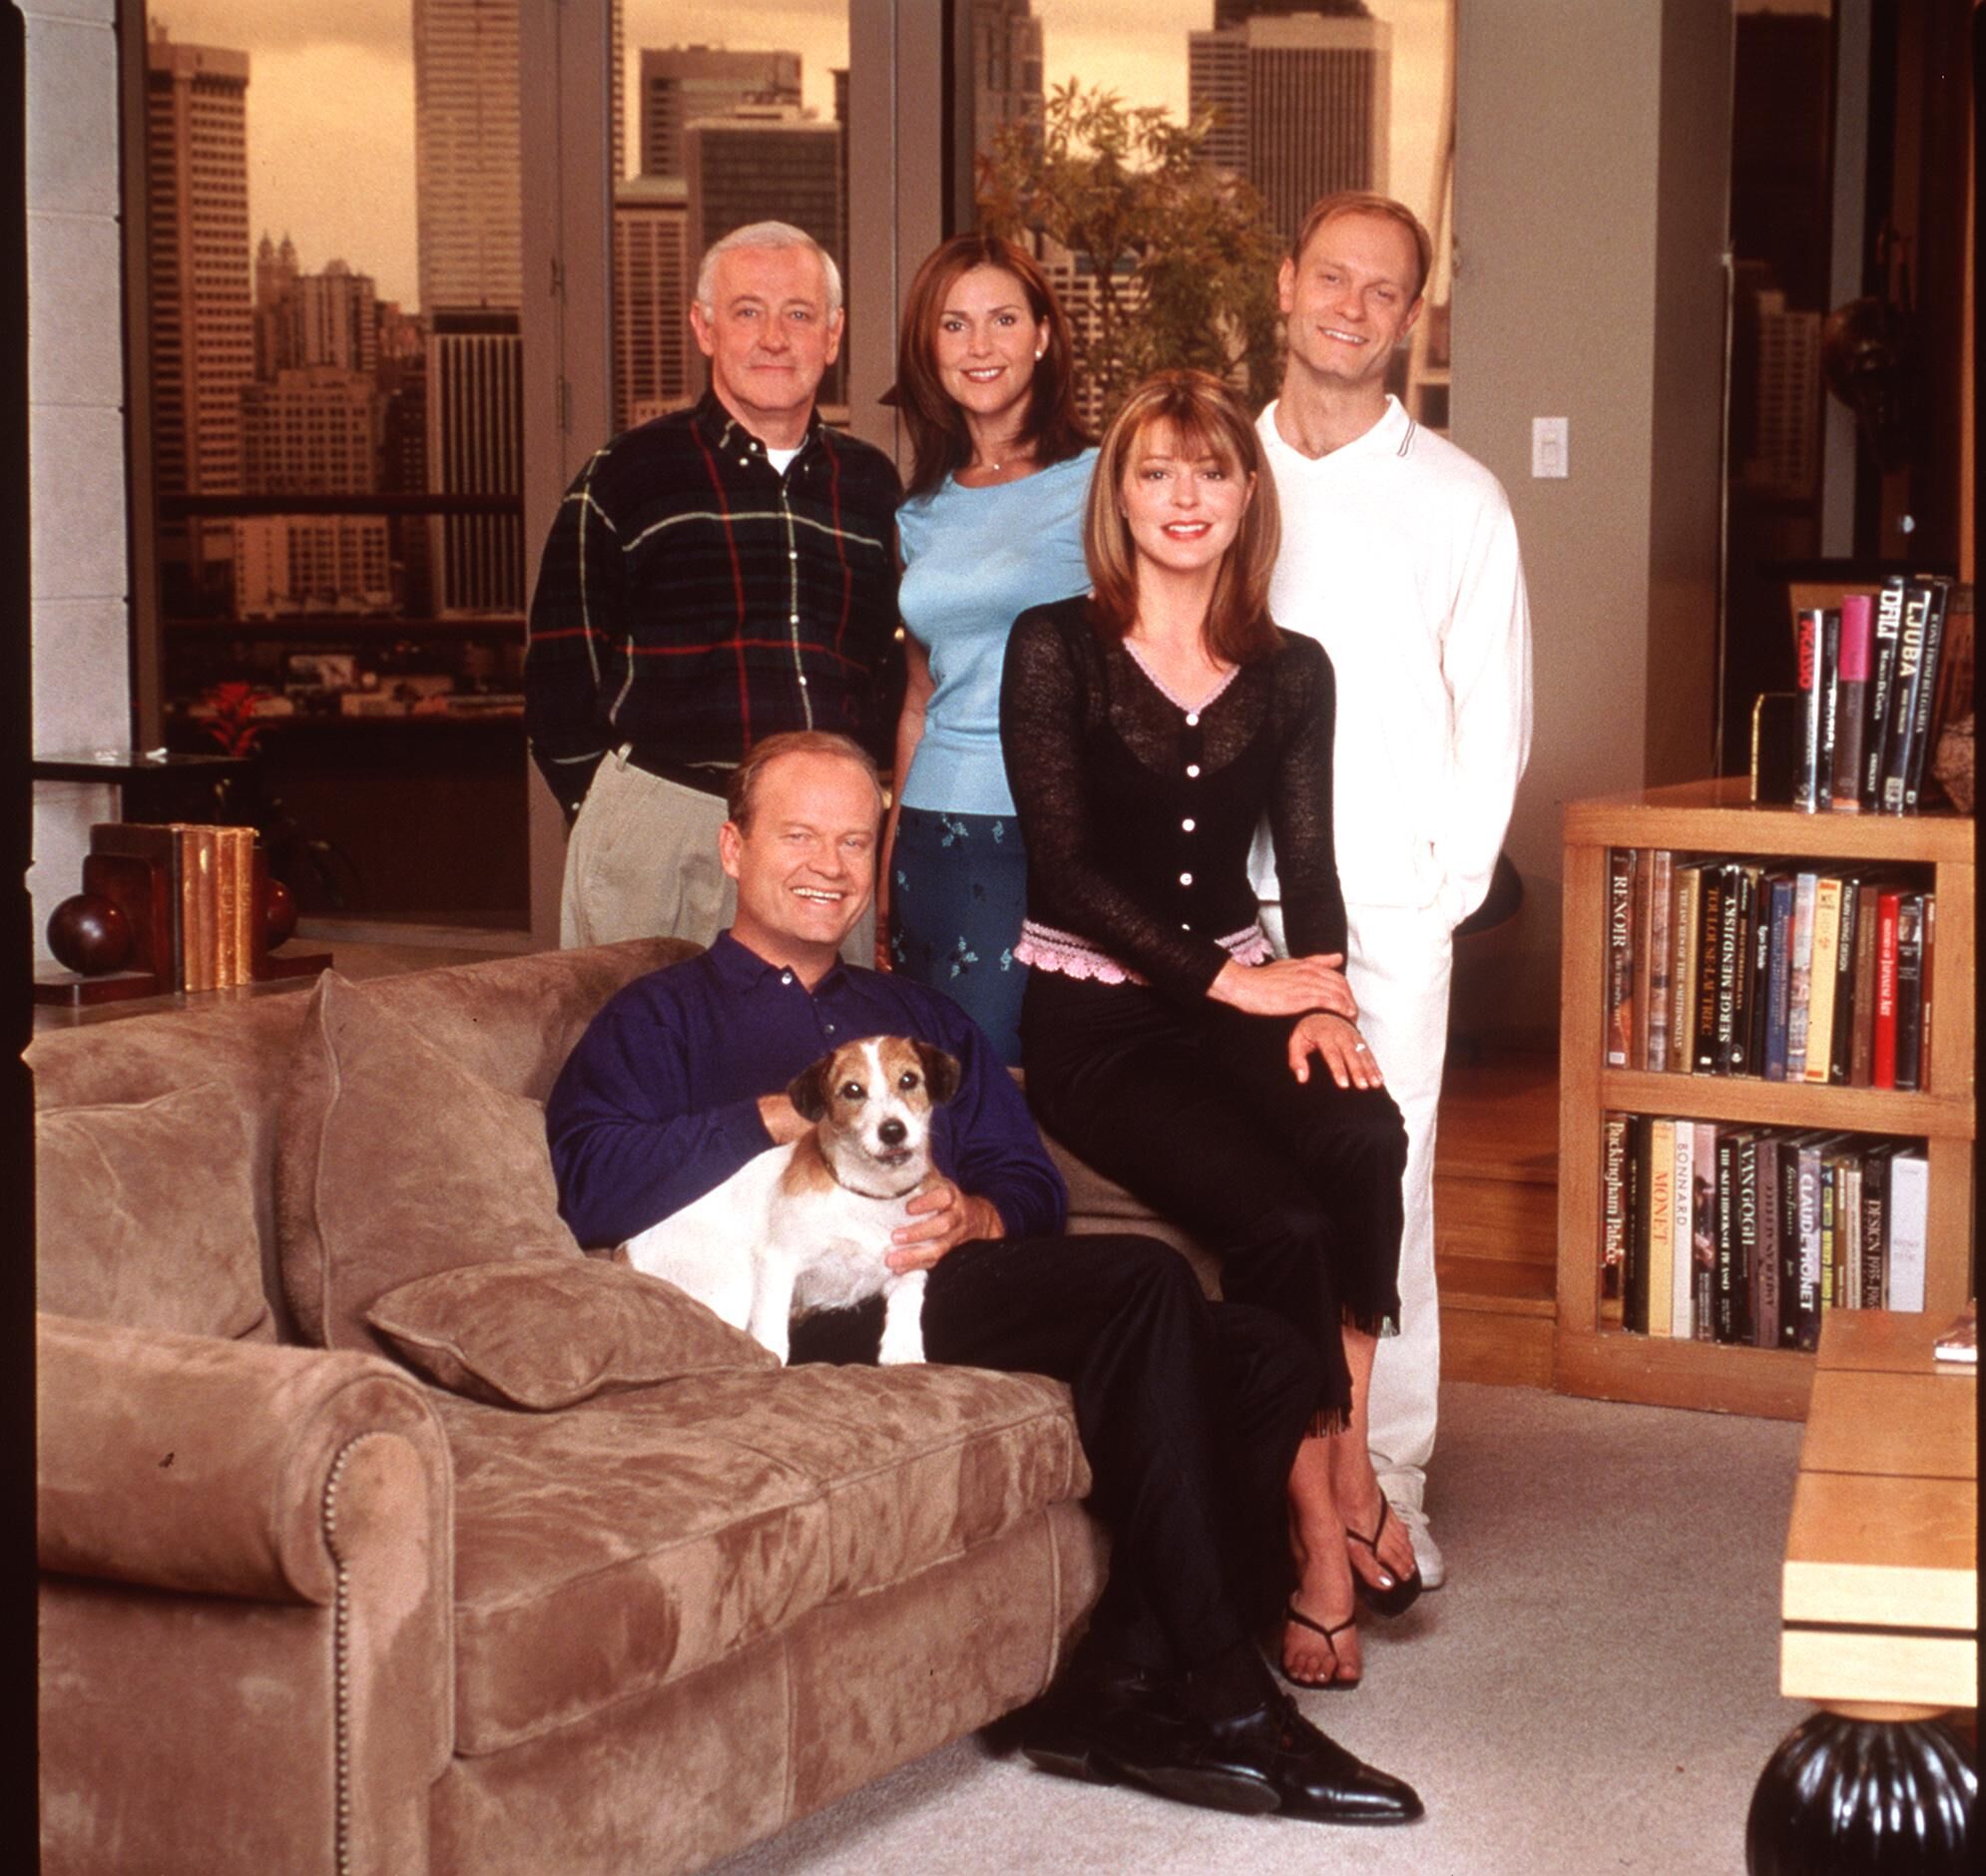 Kelsey Grammer, Peri Gilpin, Jane Leeves, John Mahoney, and David Hyde Pierce stars in the NBC series "Fraiser." | Source: Getty Images